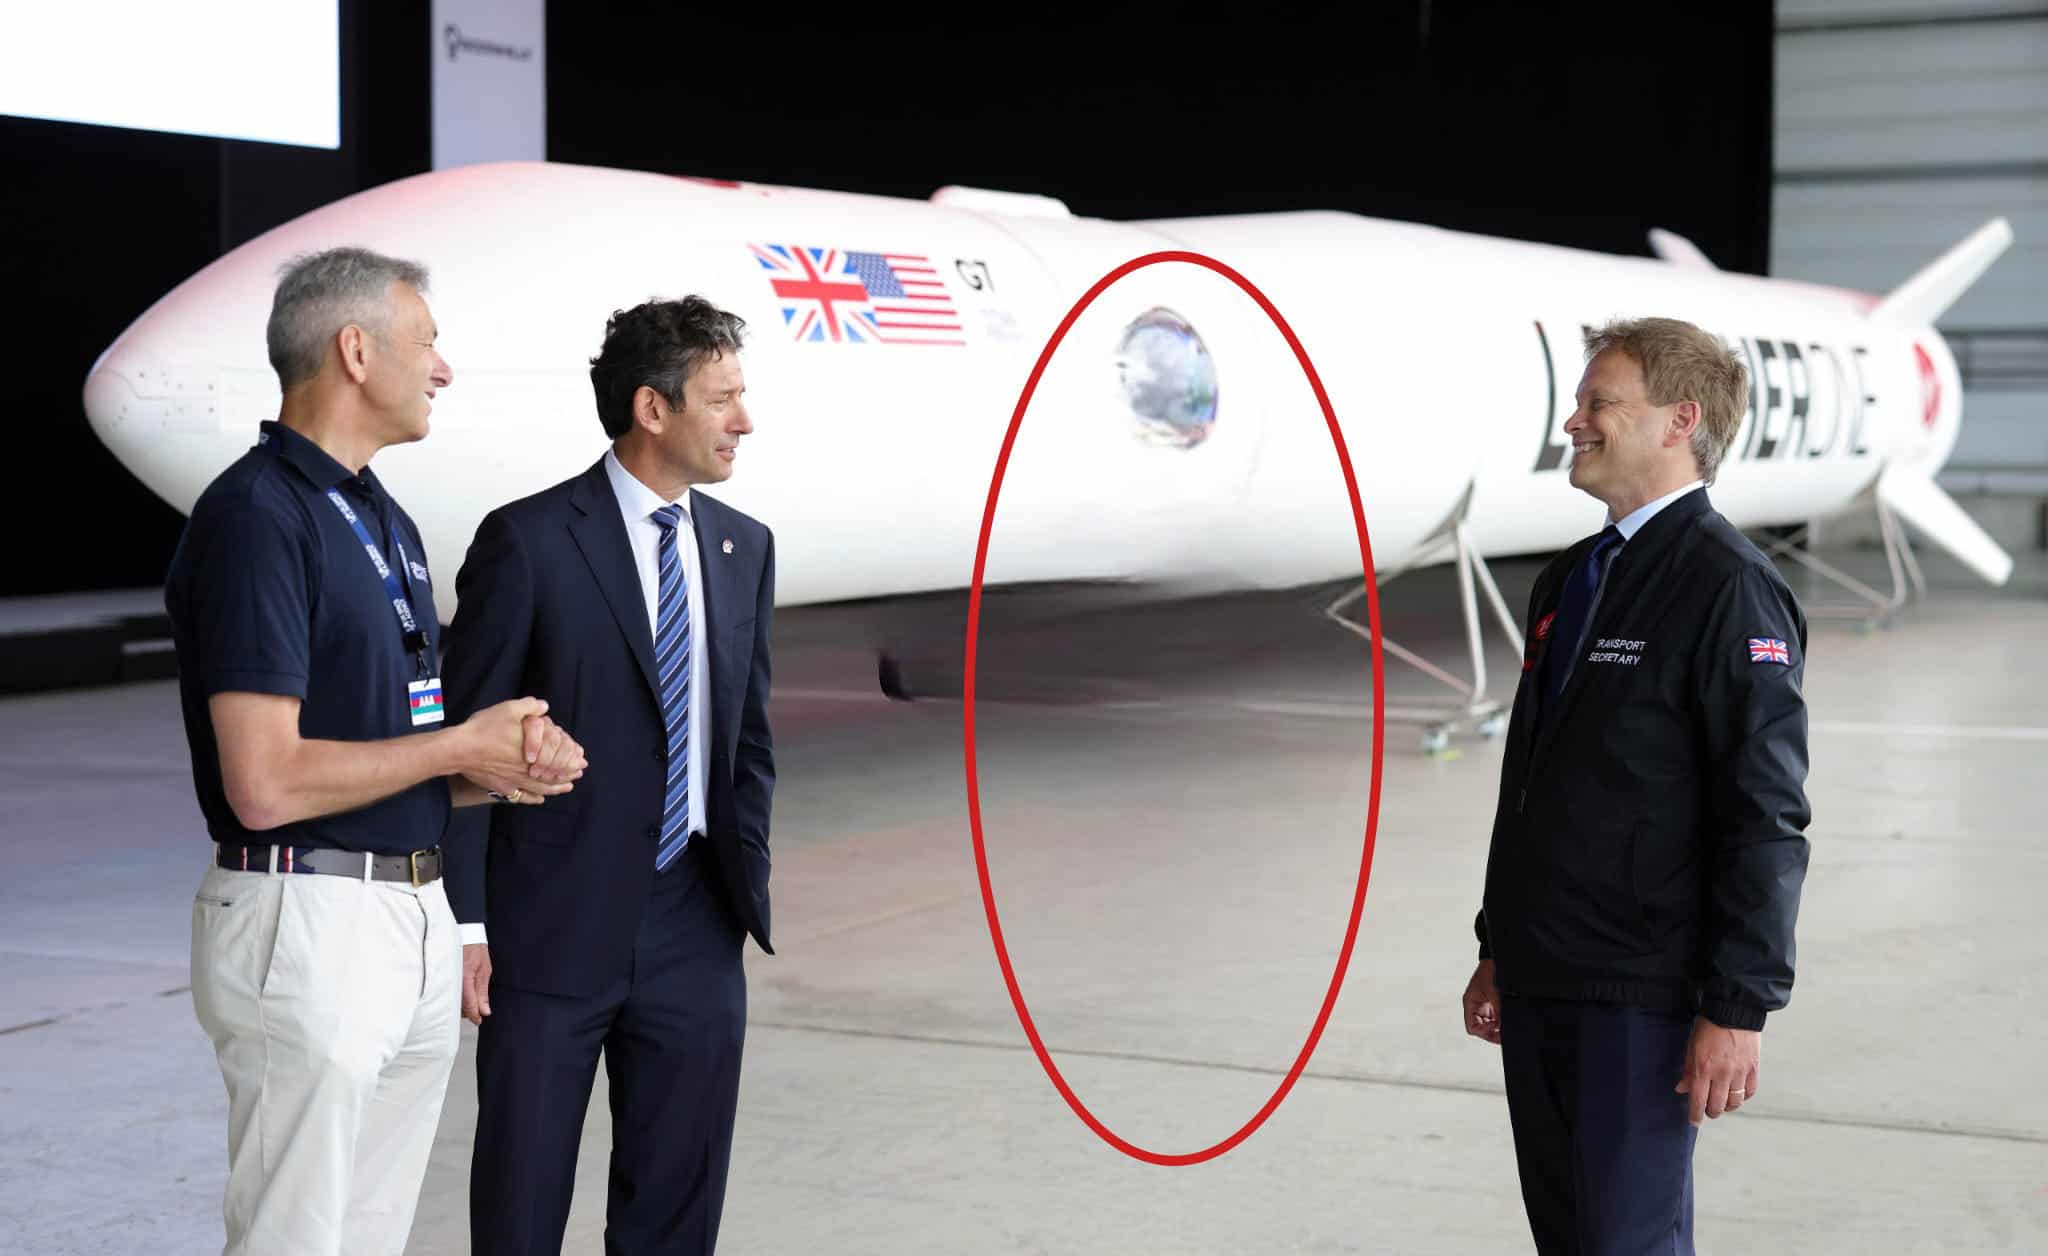 Hilarious: Shapps photoshops Boris out of Spaceport pic ahead of doomed launch